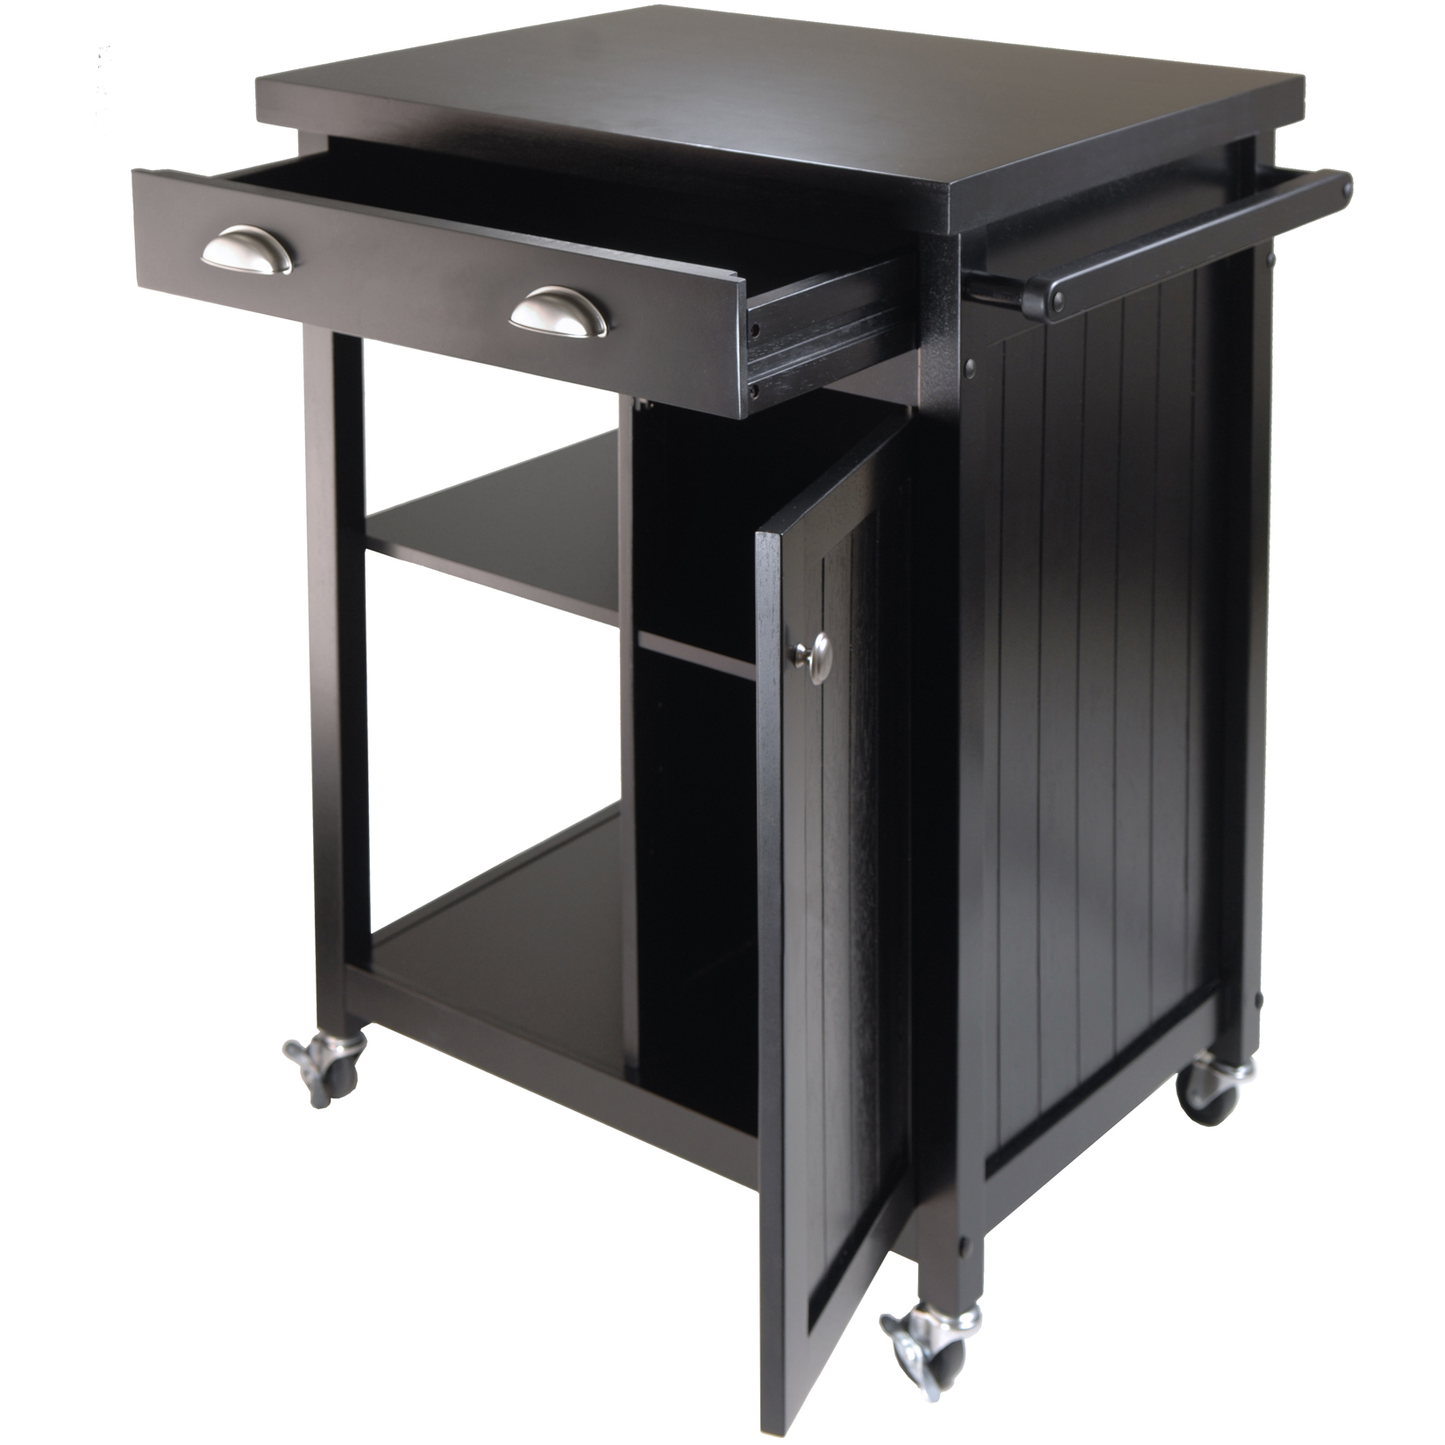 Winsome Timber Kitchen Cart with Wheels and Wainscot Panel - Black -  - 2